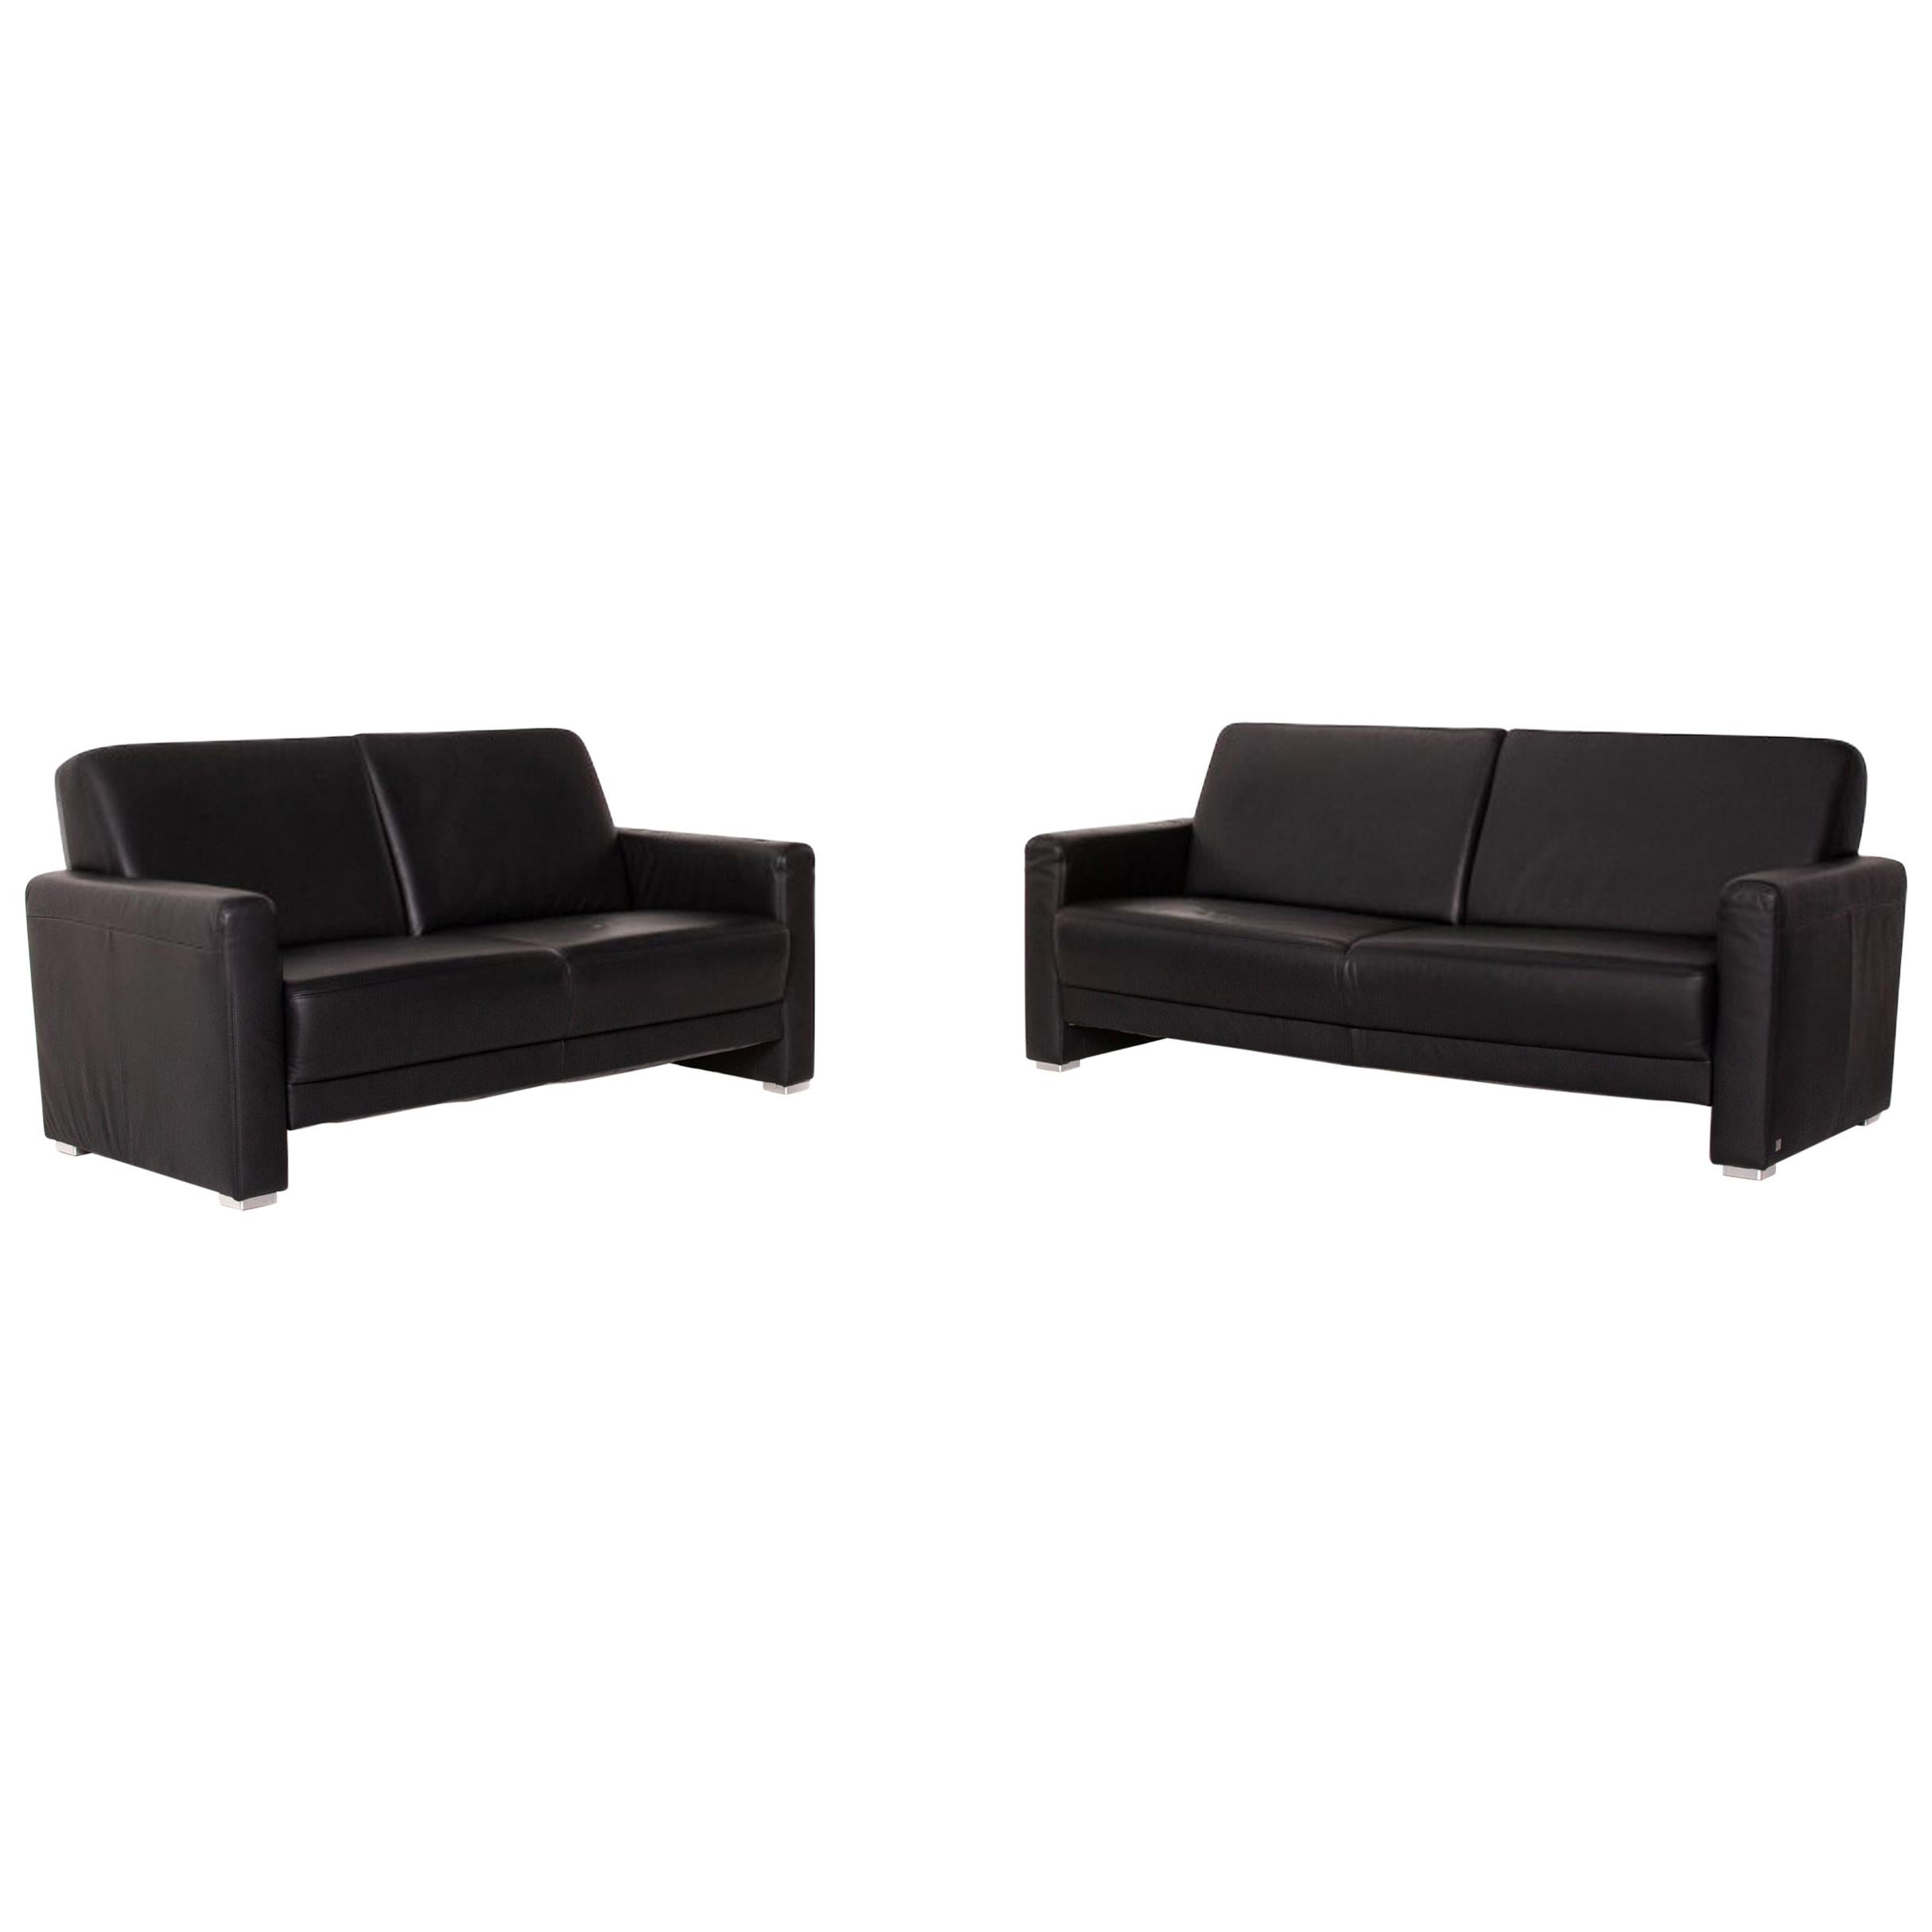 Sample Ring Leather Sofa Set Black 1 Three-Seat 1 Two-Seat Couch For Sale